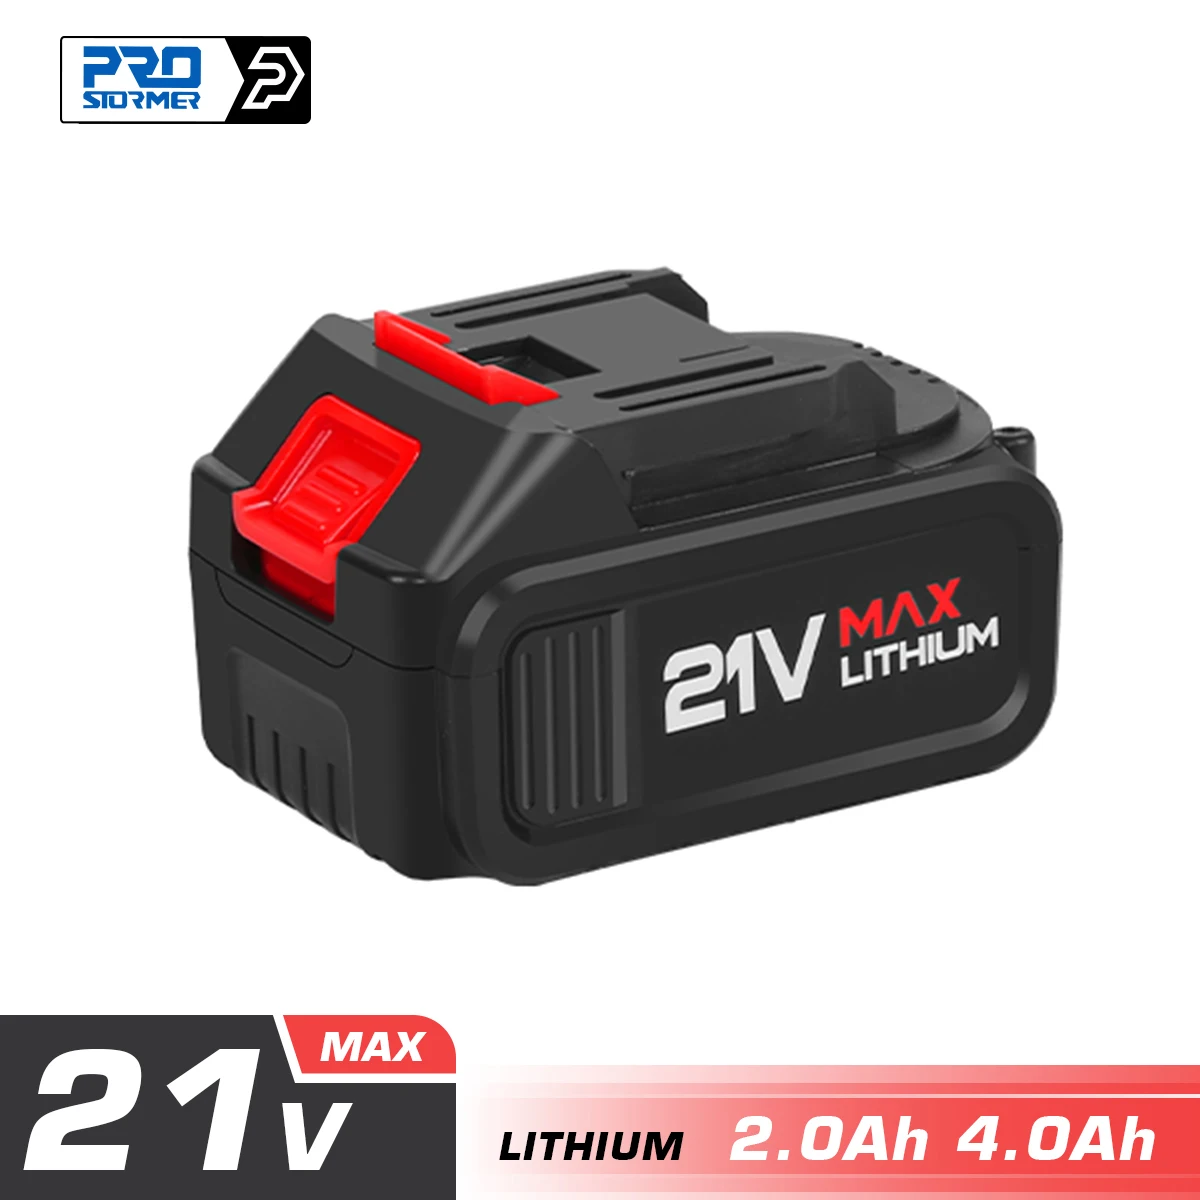 PROSTORMER 21V 2000/4000mAh Li-ion Battery for 21V Series Power Tools Electric Drill Cordless Wrench Angle Grinder Chainsaw